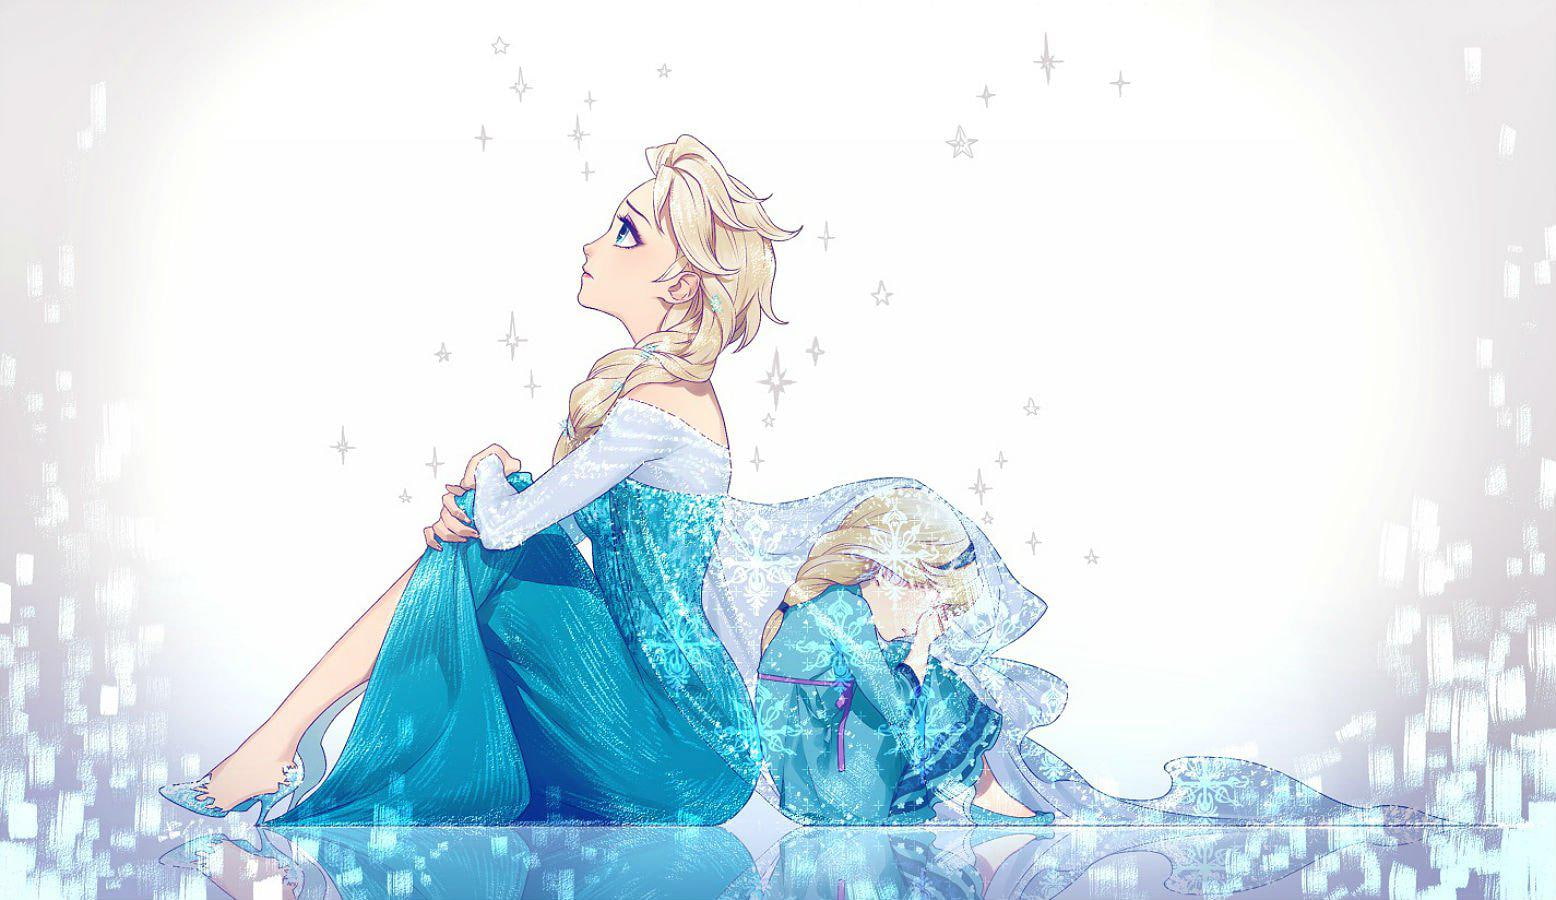 Poor Queen Elsa the day of its creation! Magnificent fanart! Sad and magnificent!